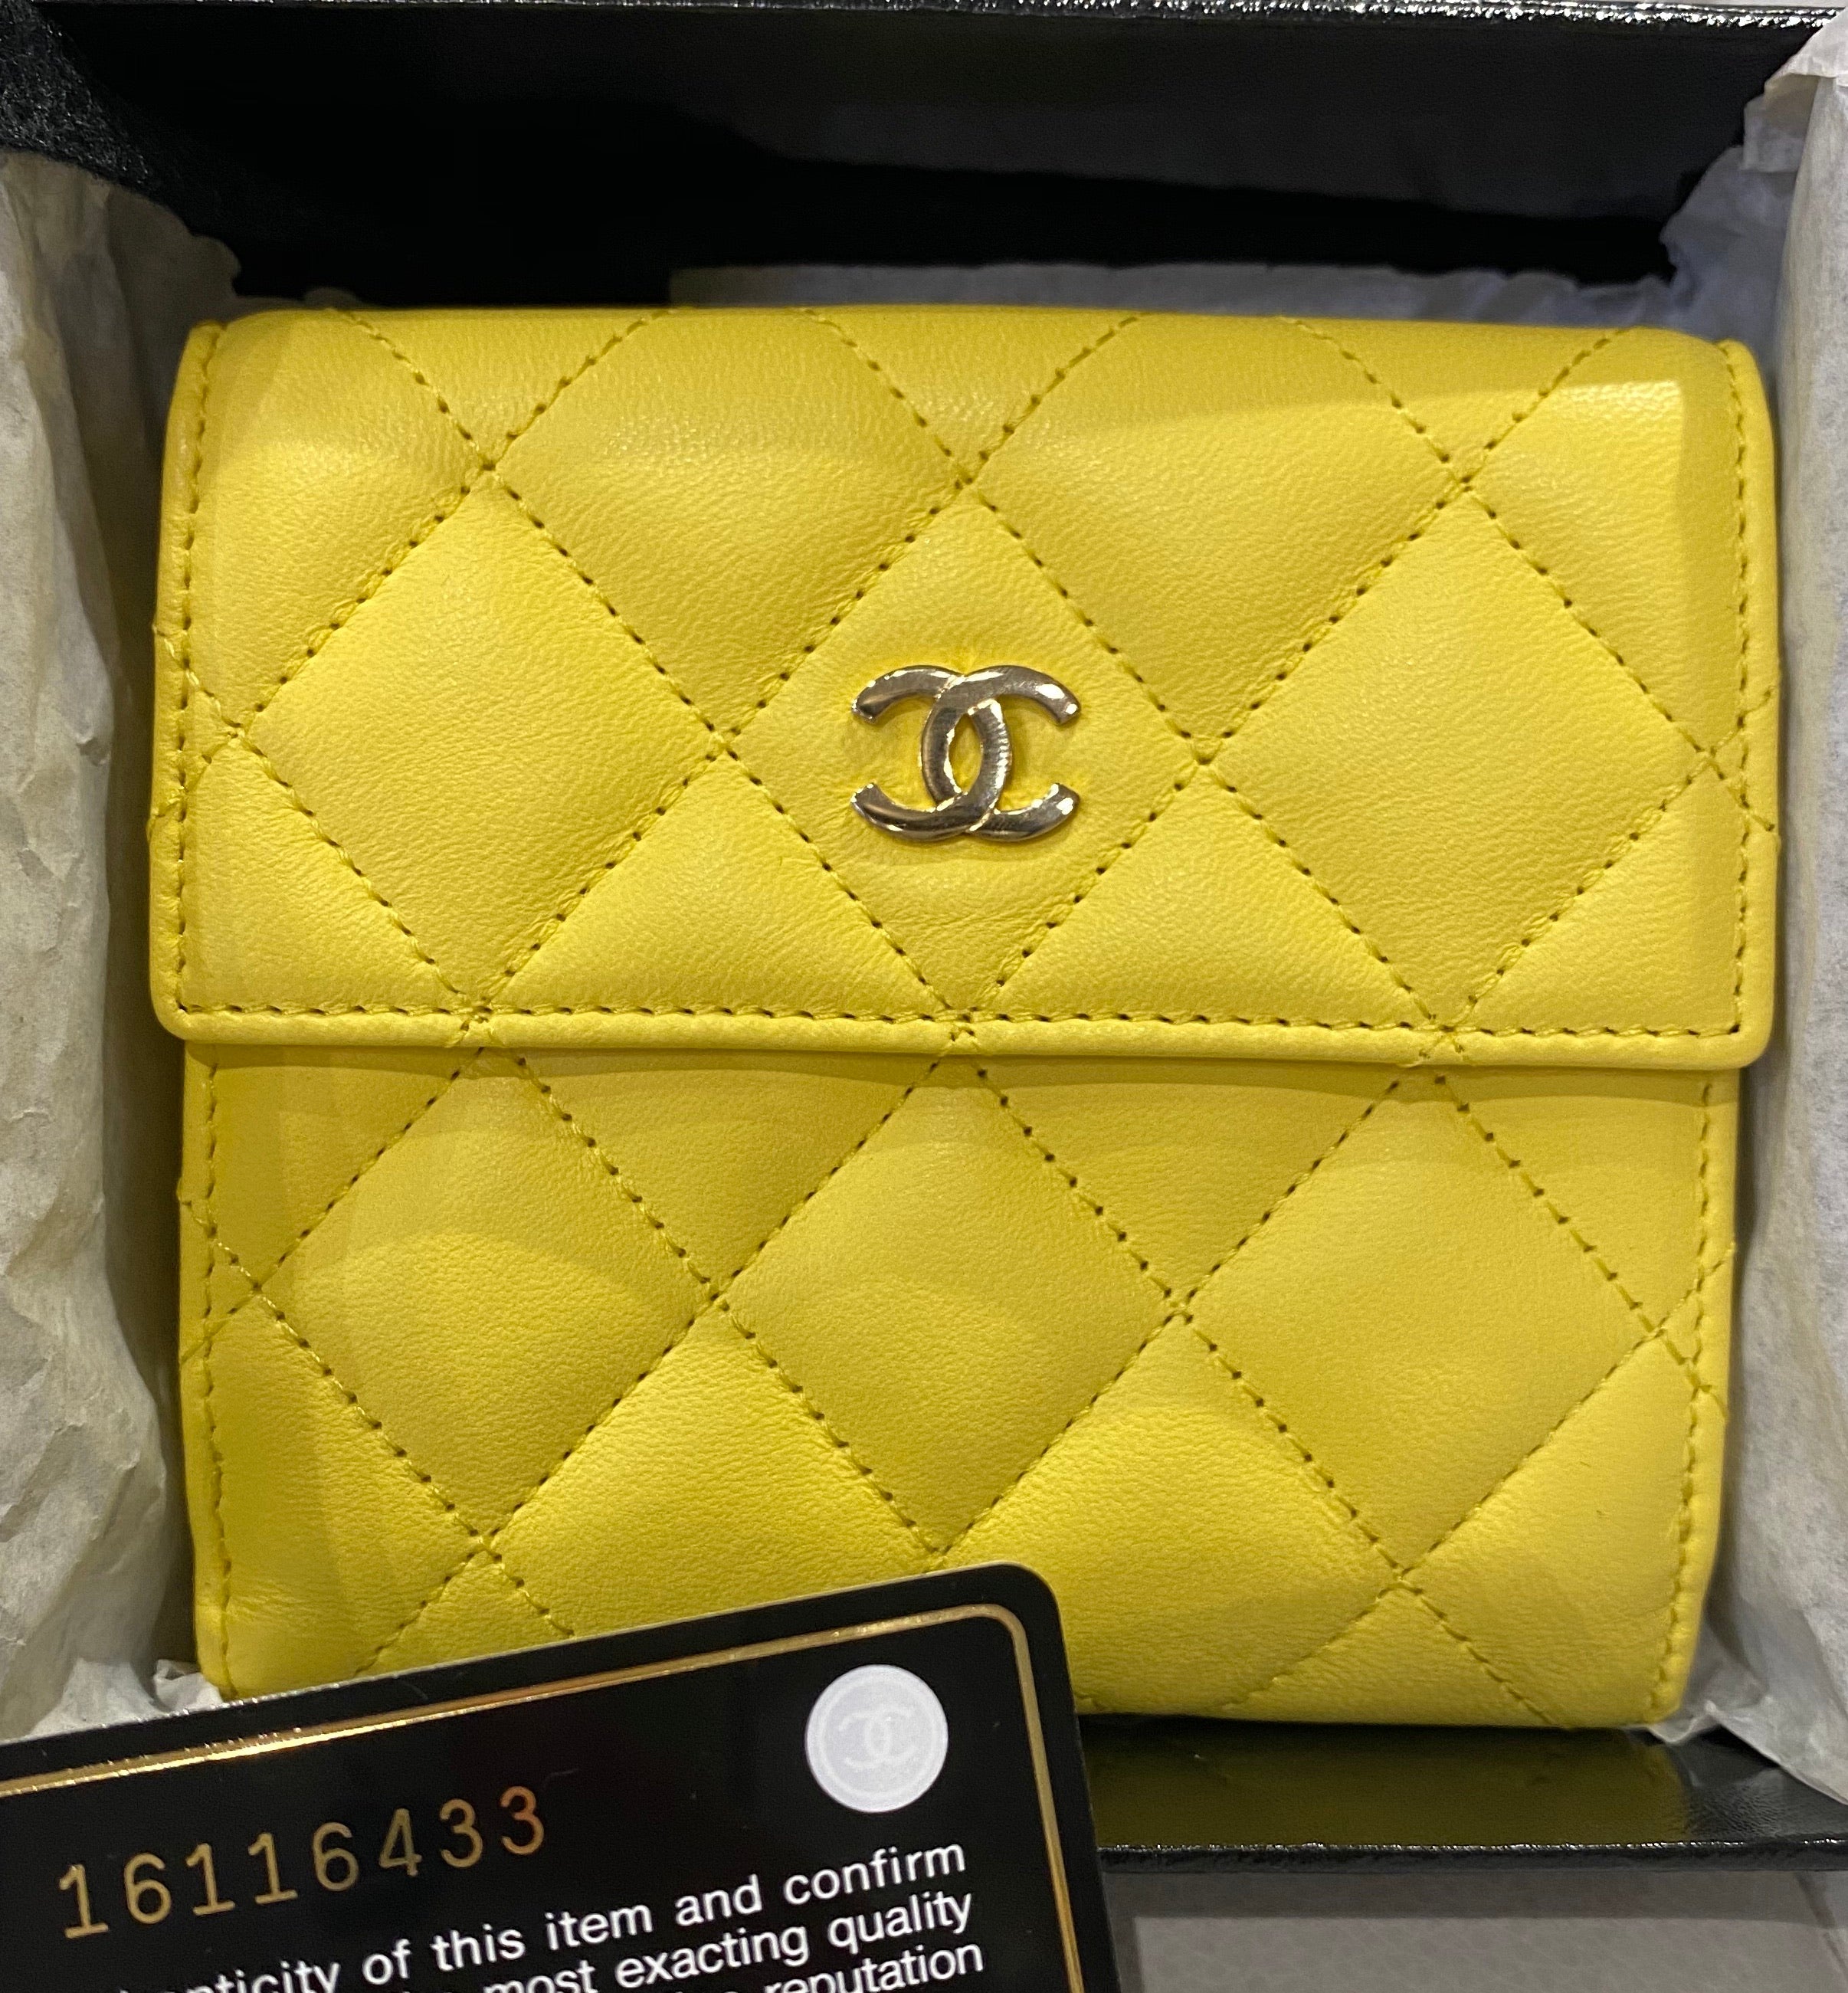 New Chanel yellow wallet